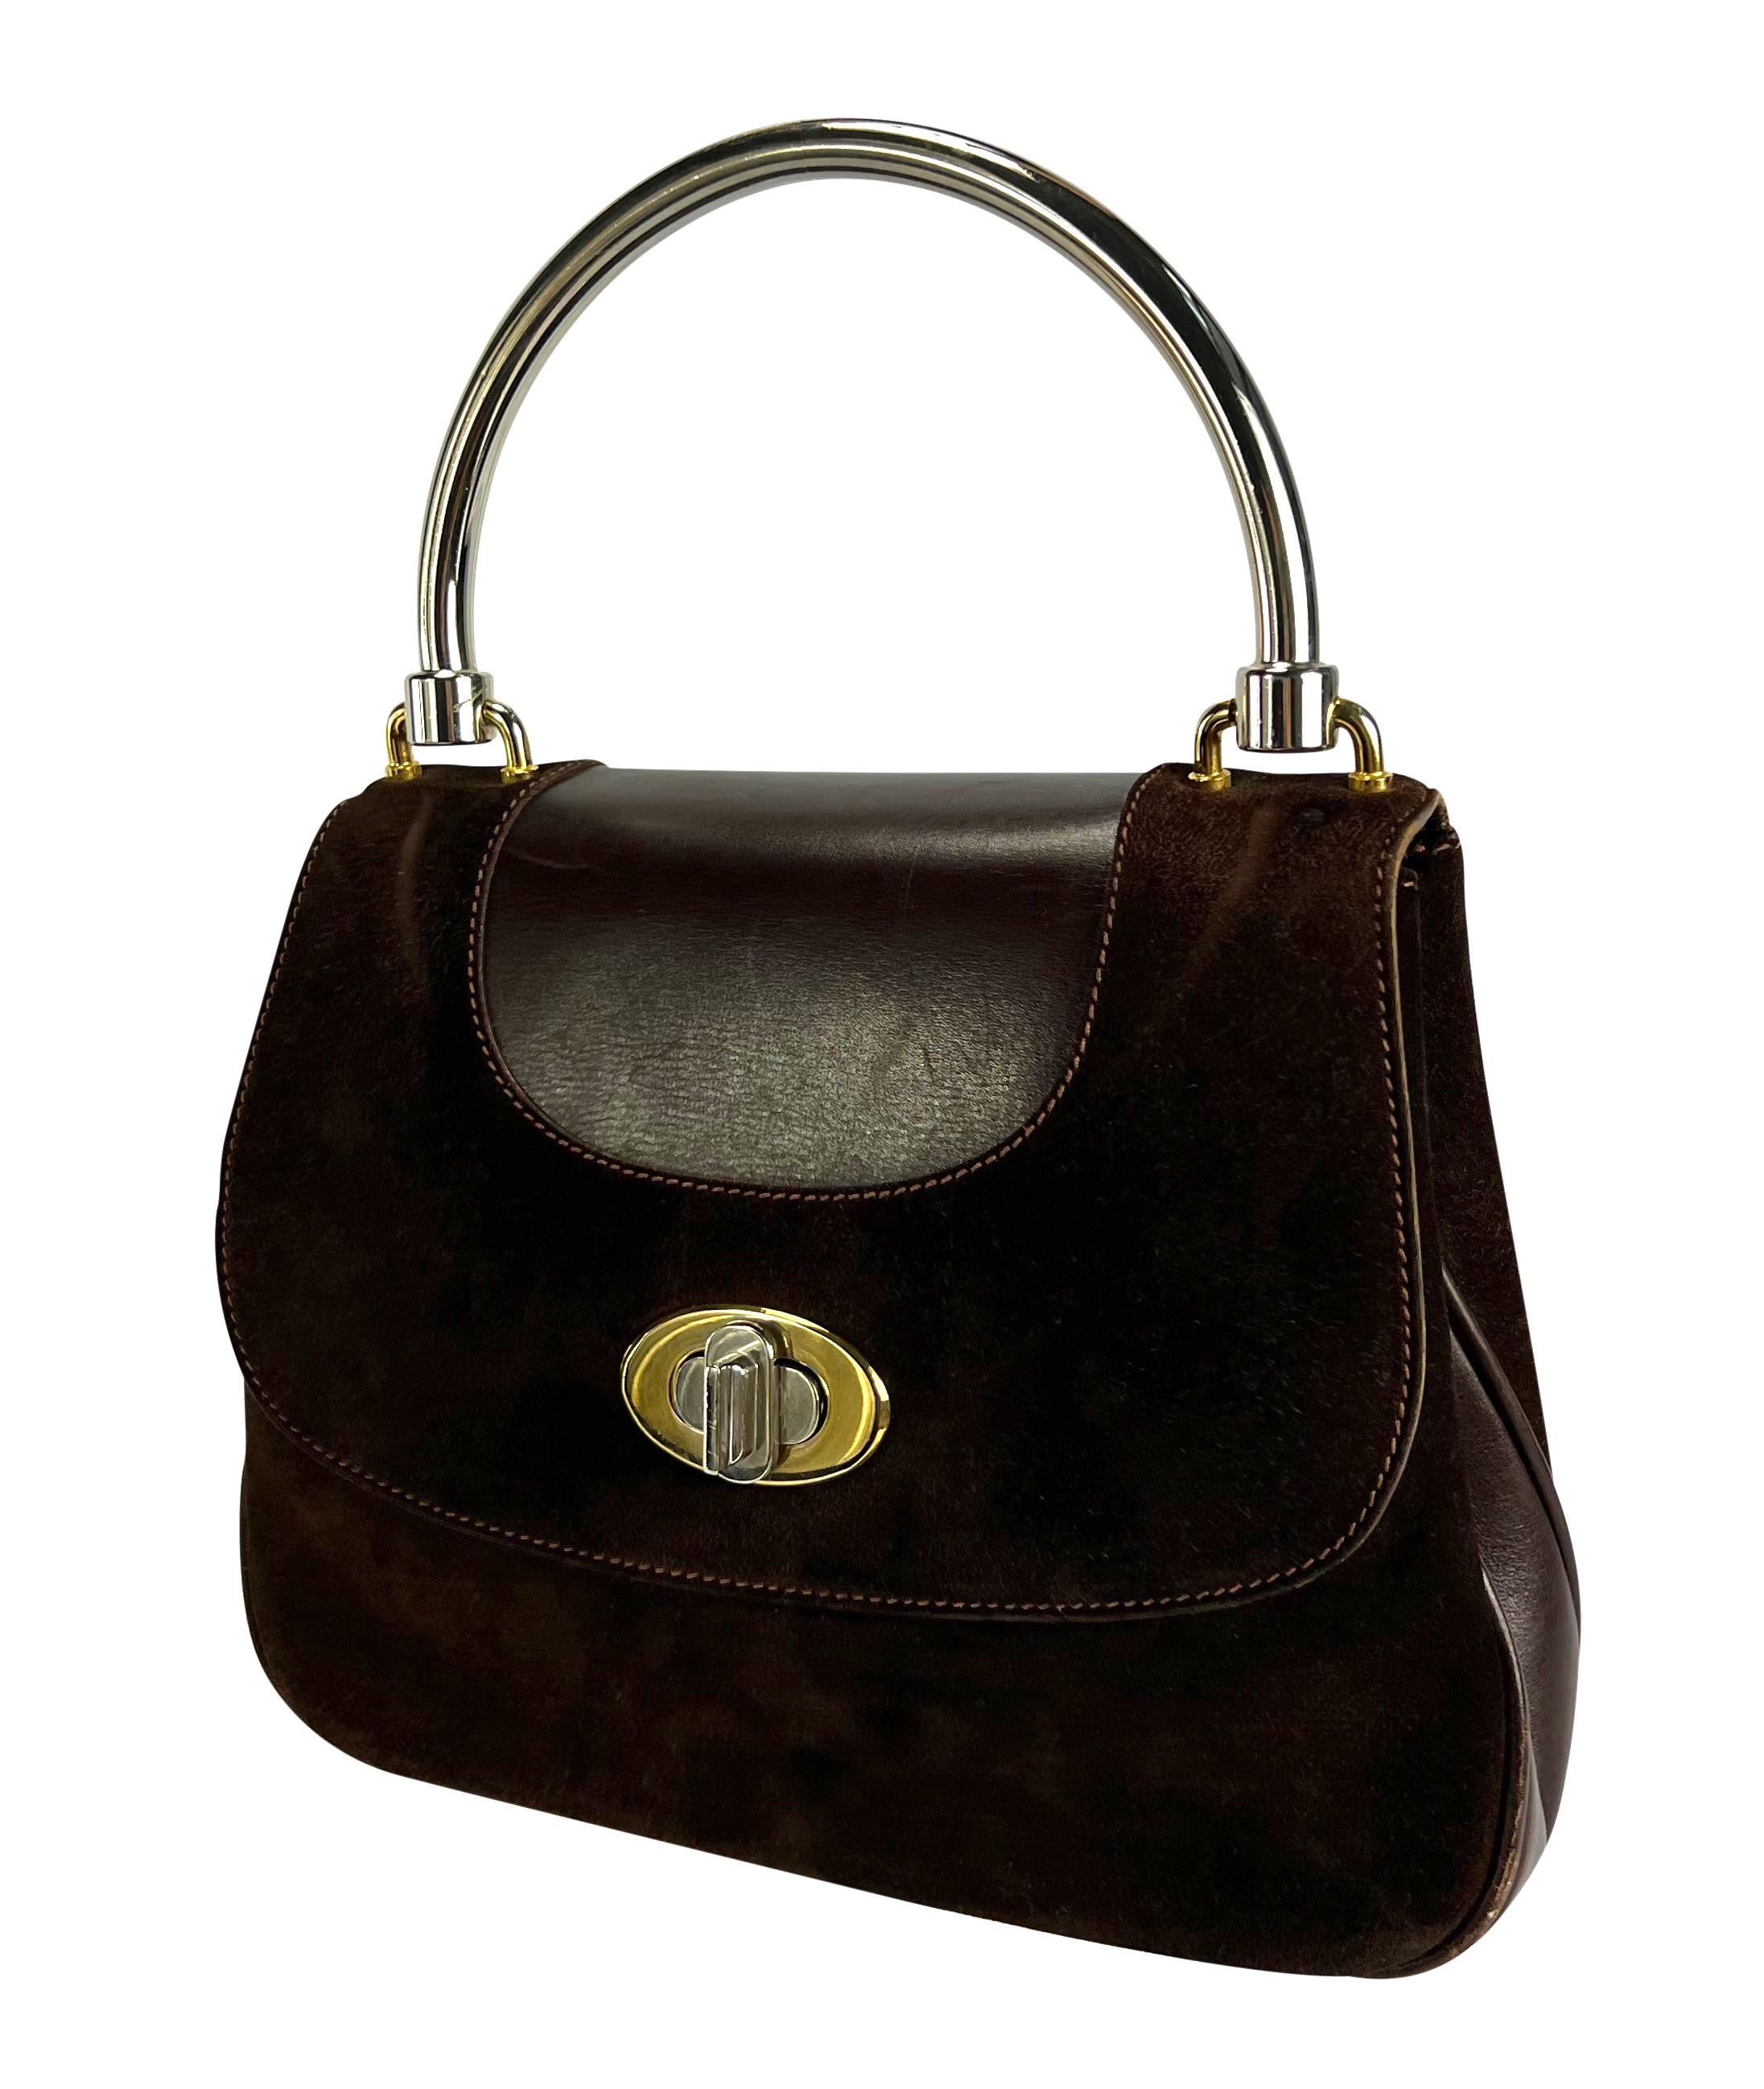 Presenting a vintage 1960s Gucci structured leather top handle bag. This classicly designed bag features a dual-tone metal handle and closure. The brown suede perfectly contrasts the shine of the two-tone hardware. Grab this classic piece of Gucci